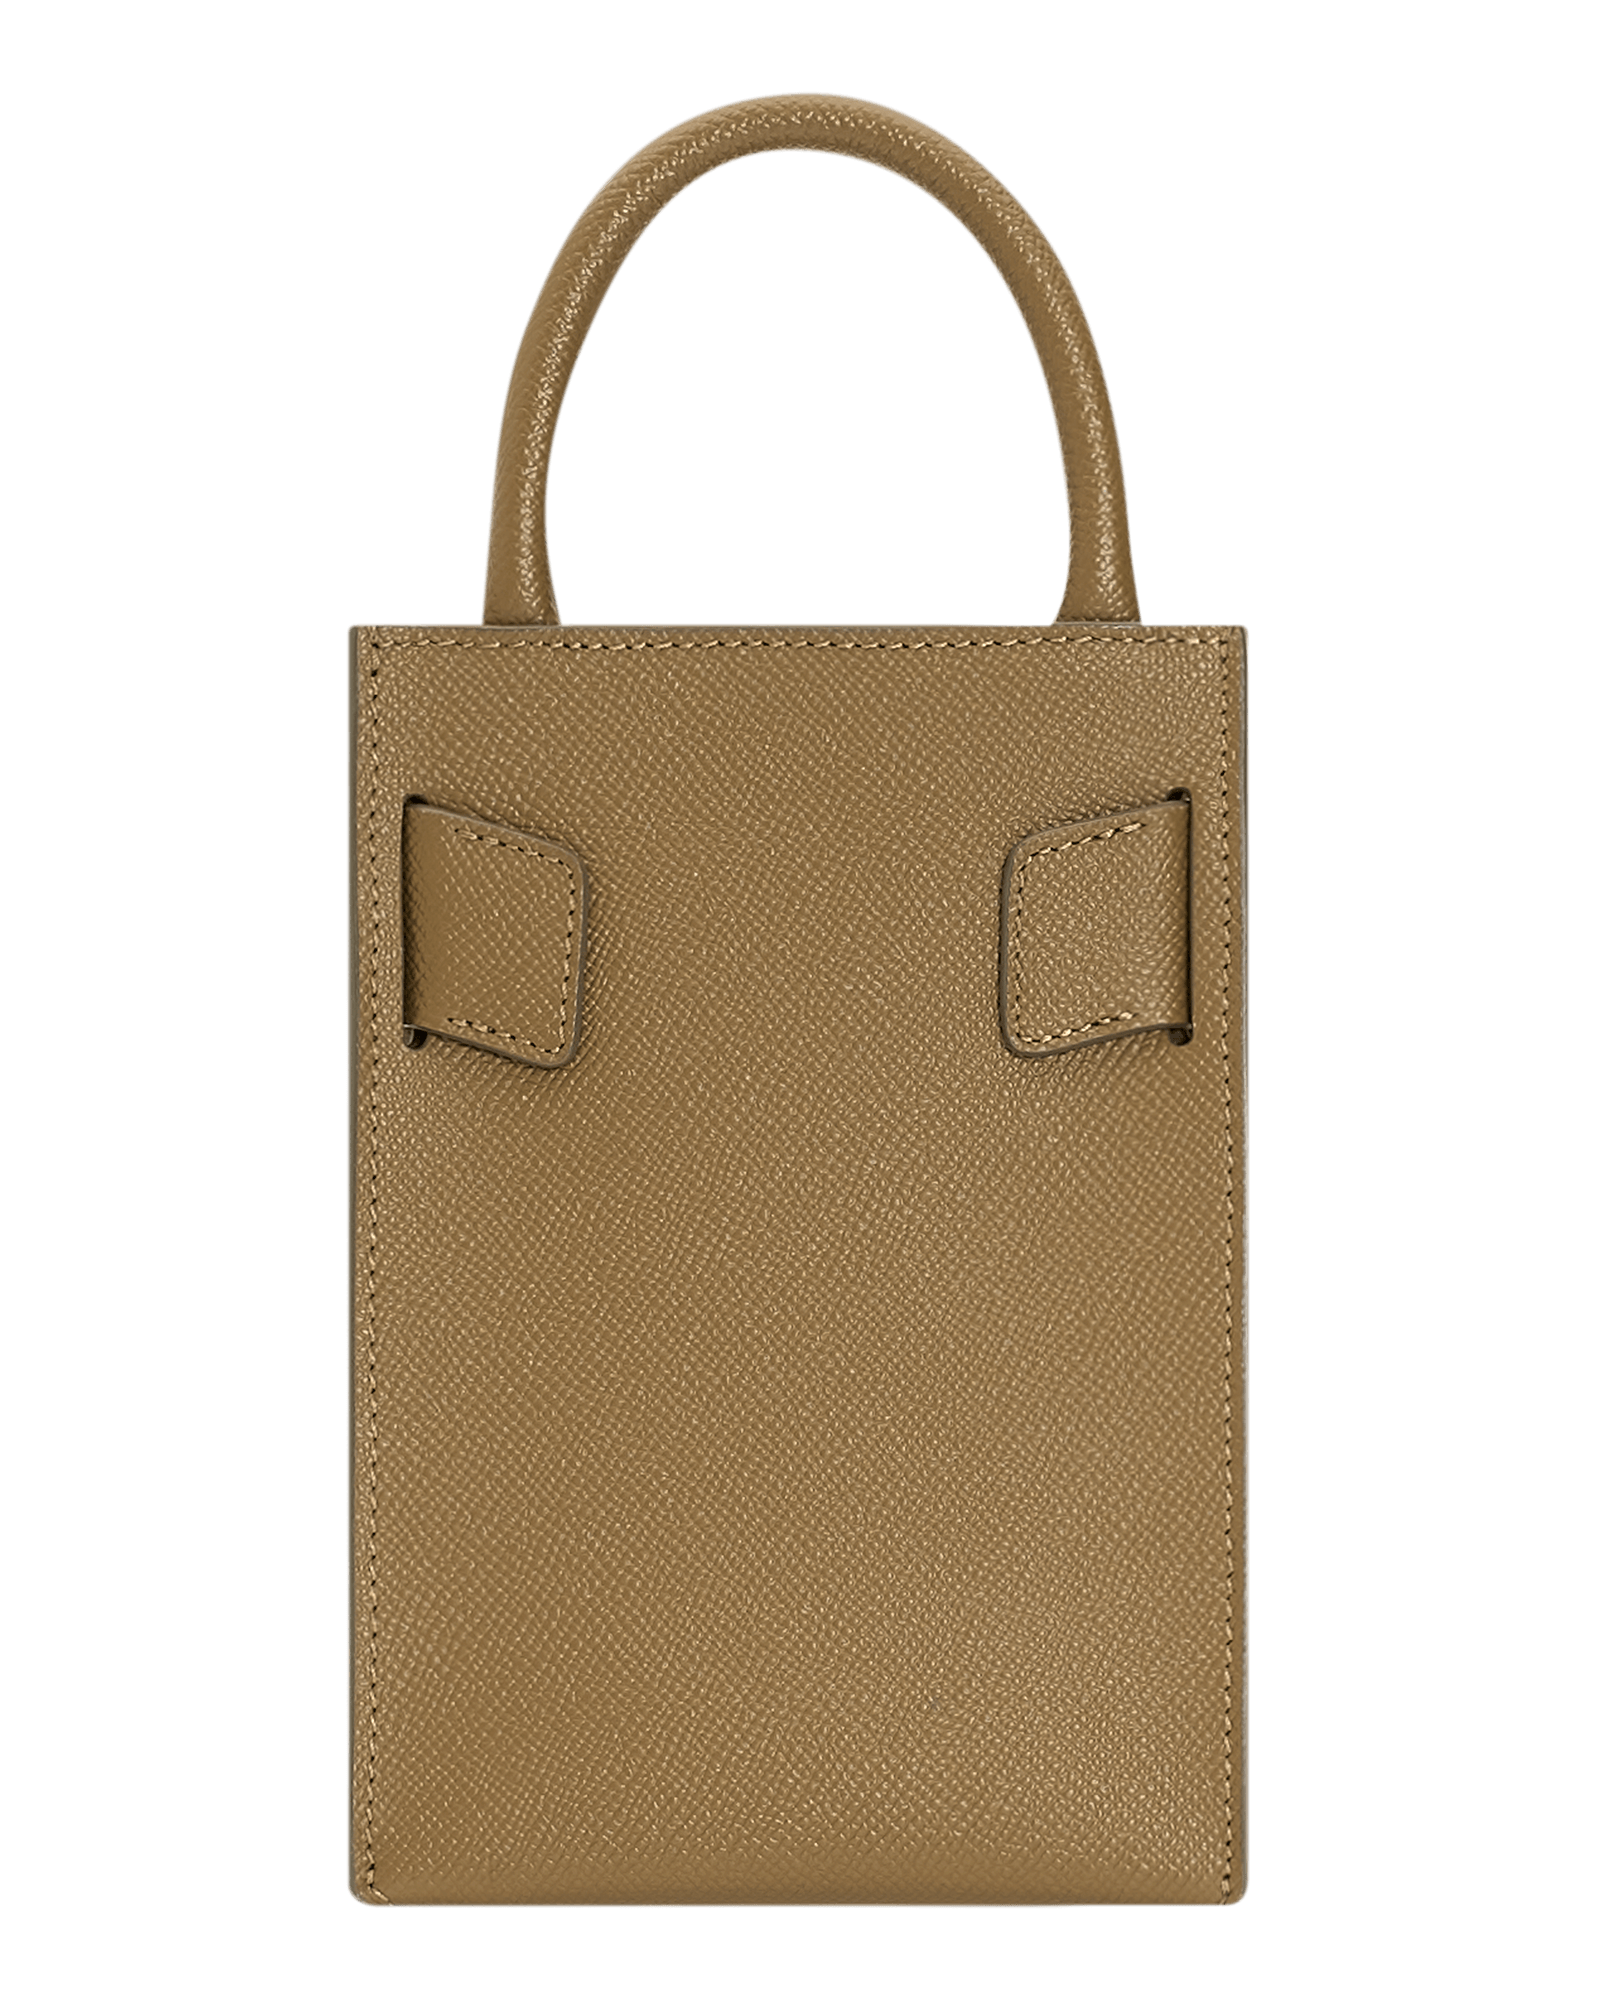 Elongated, small structured brown handbag with a gold buckle on the front, carry strap, and twin handles. Made with grained calfskin leather.